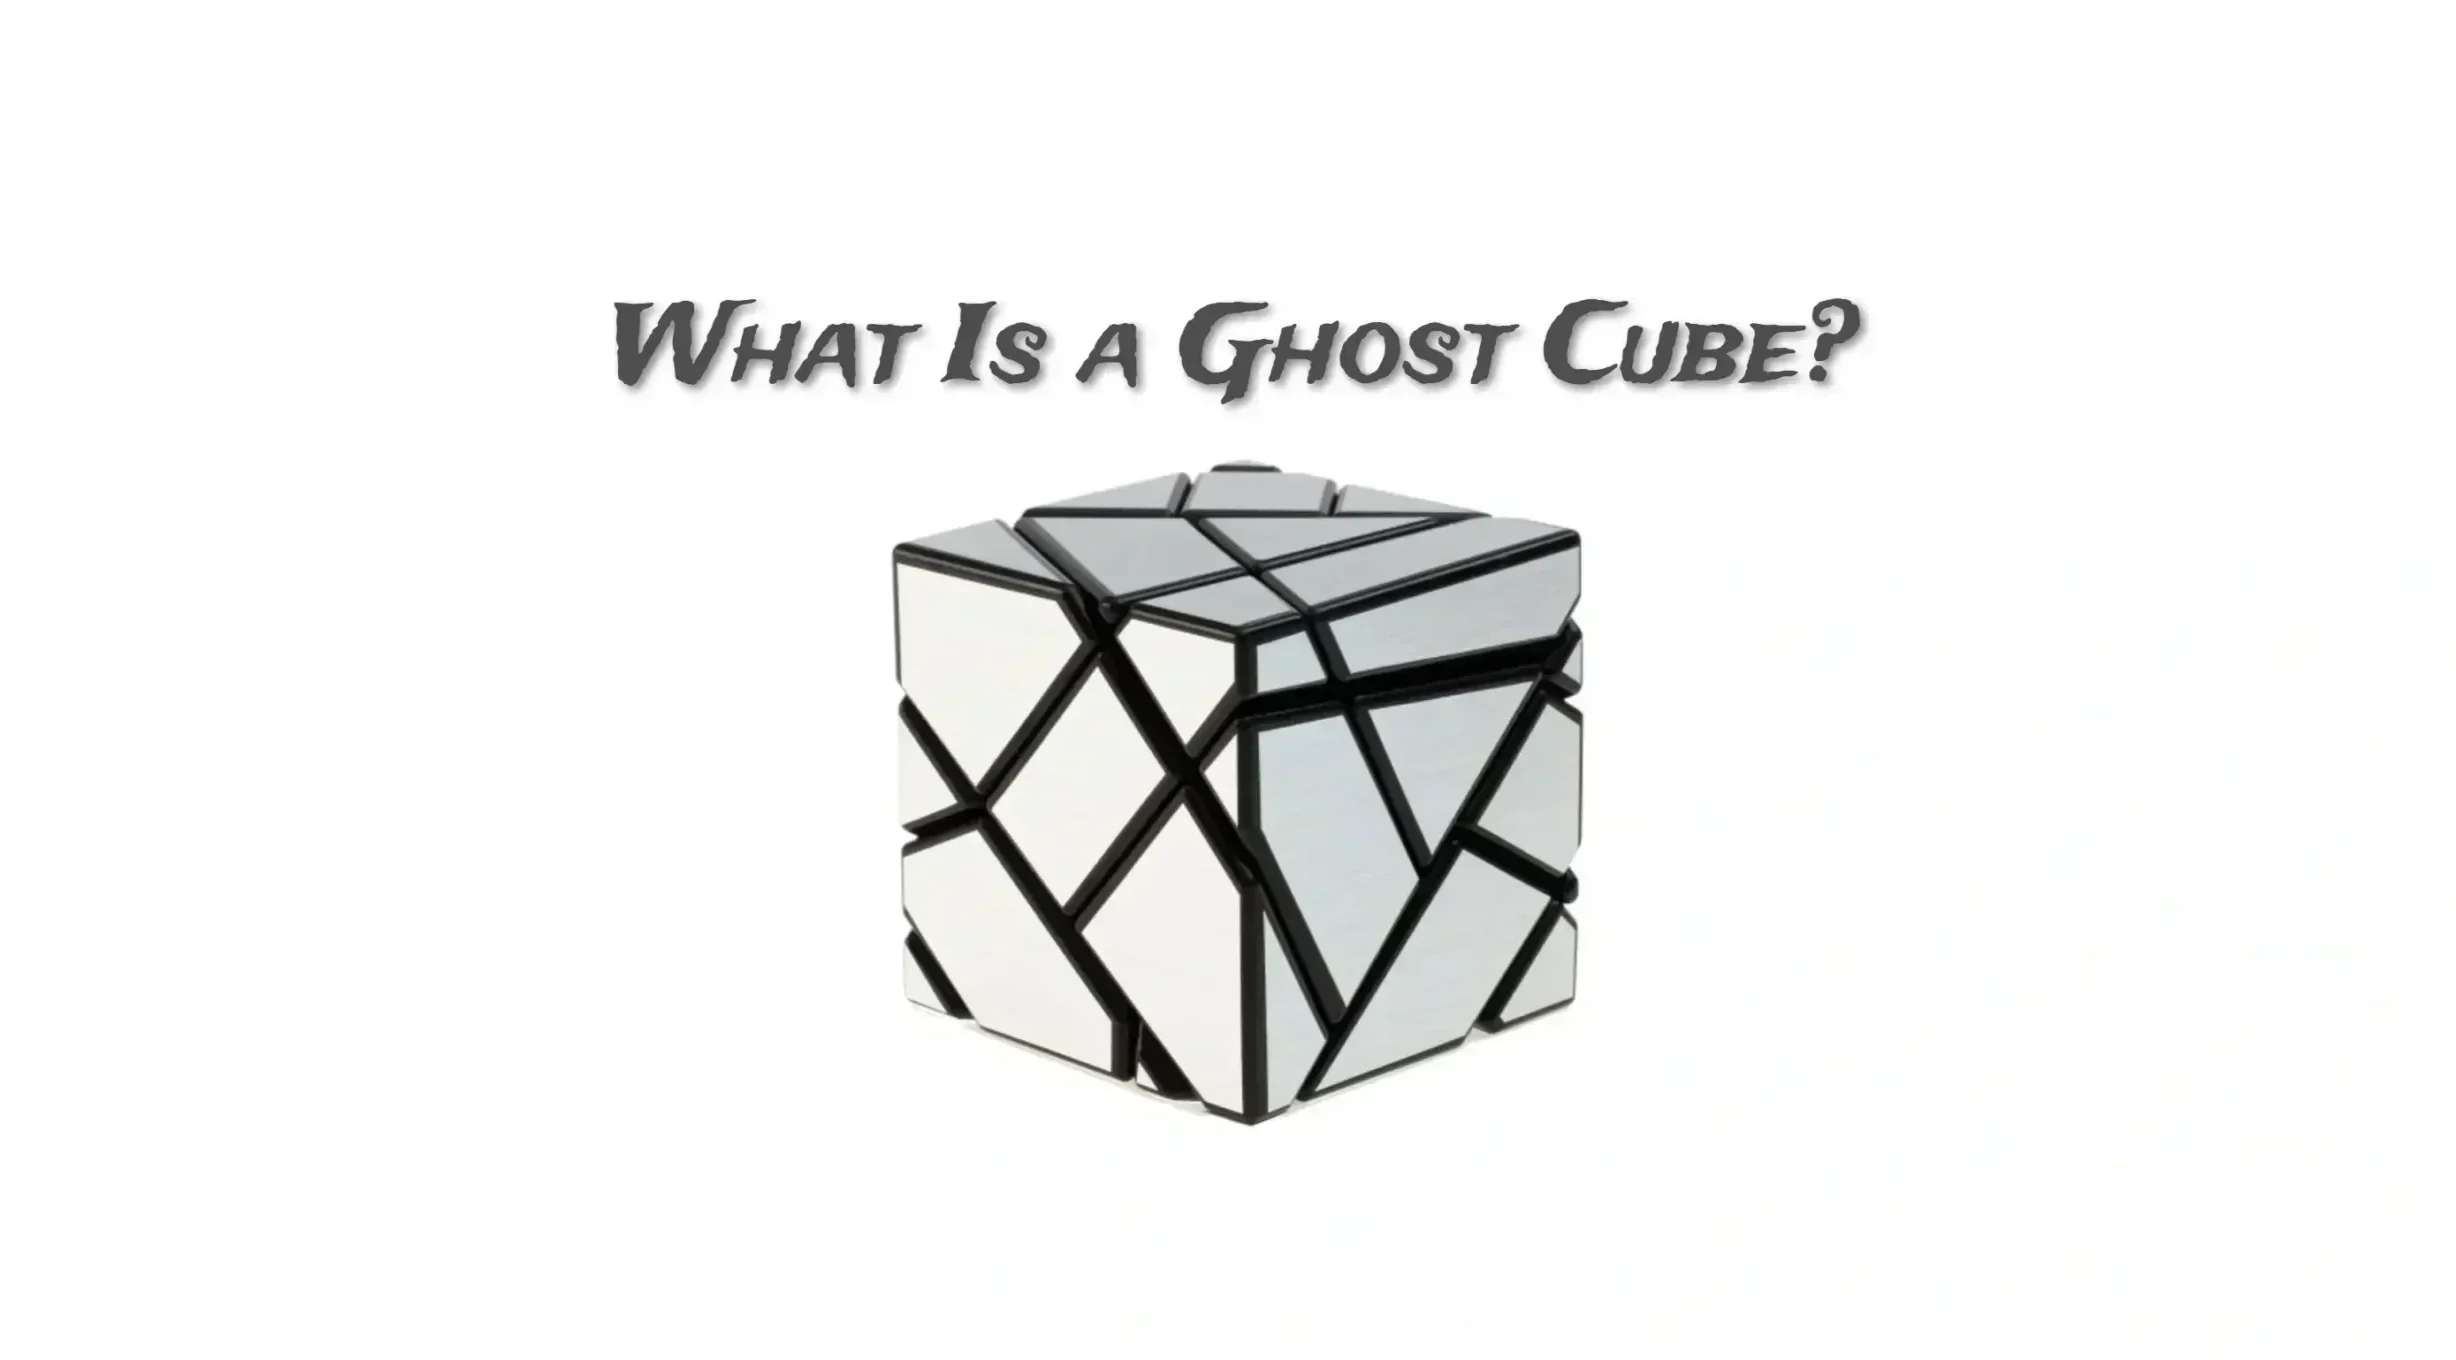 What is a ghost cube?